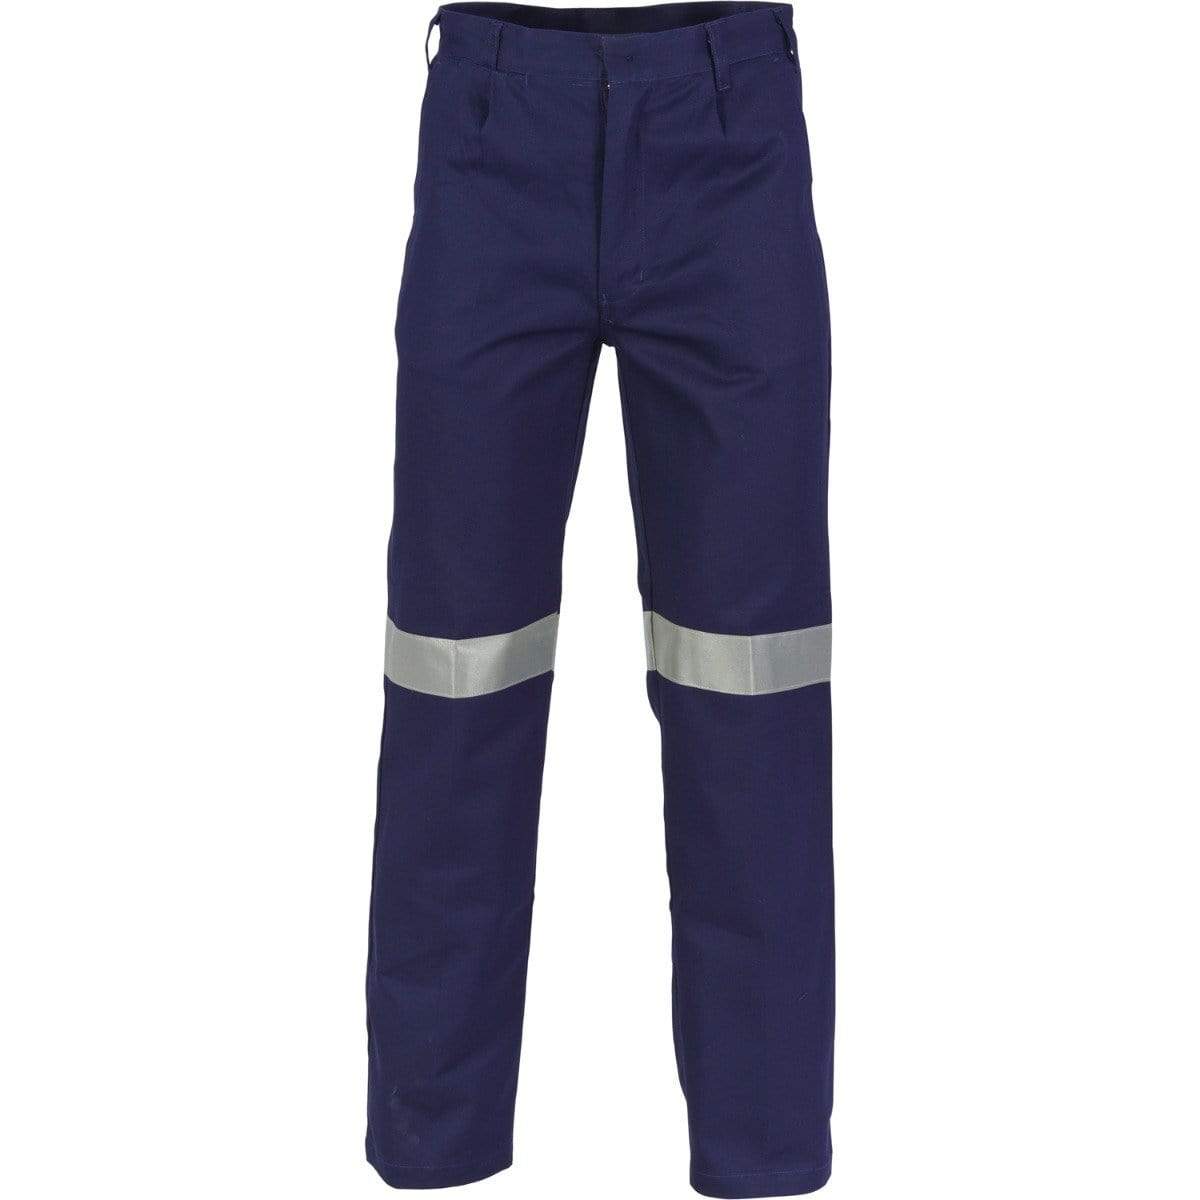 Dnc Workwear Cotton Drill Pants With 3m Reflective Tape - 3314 Work Wear DNC Workwear Navy 107R 